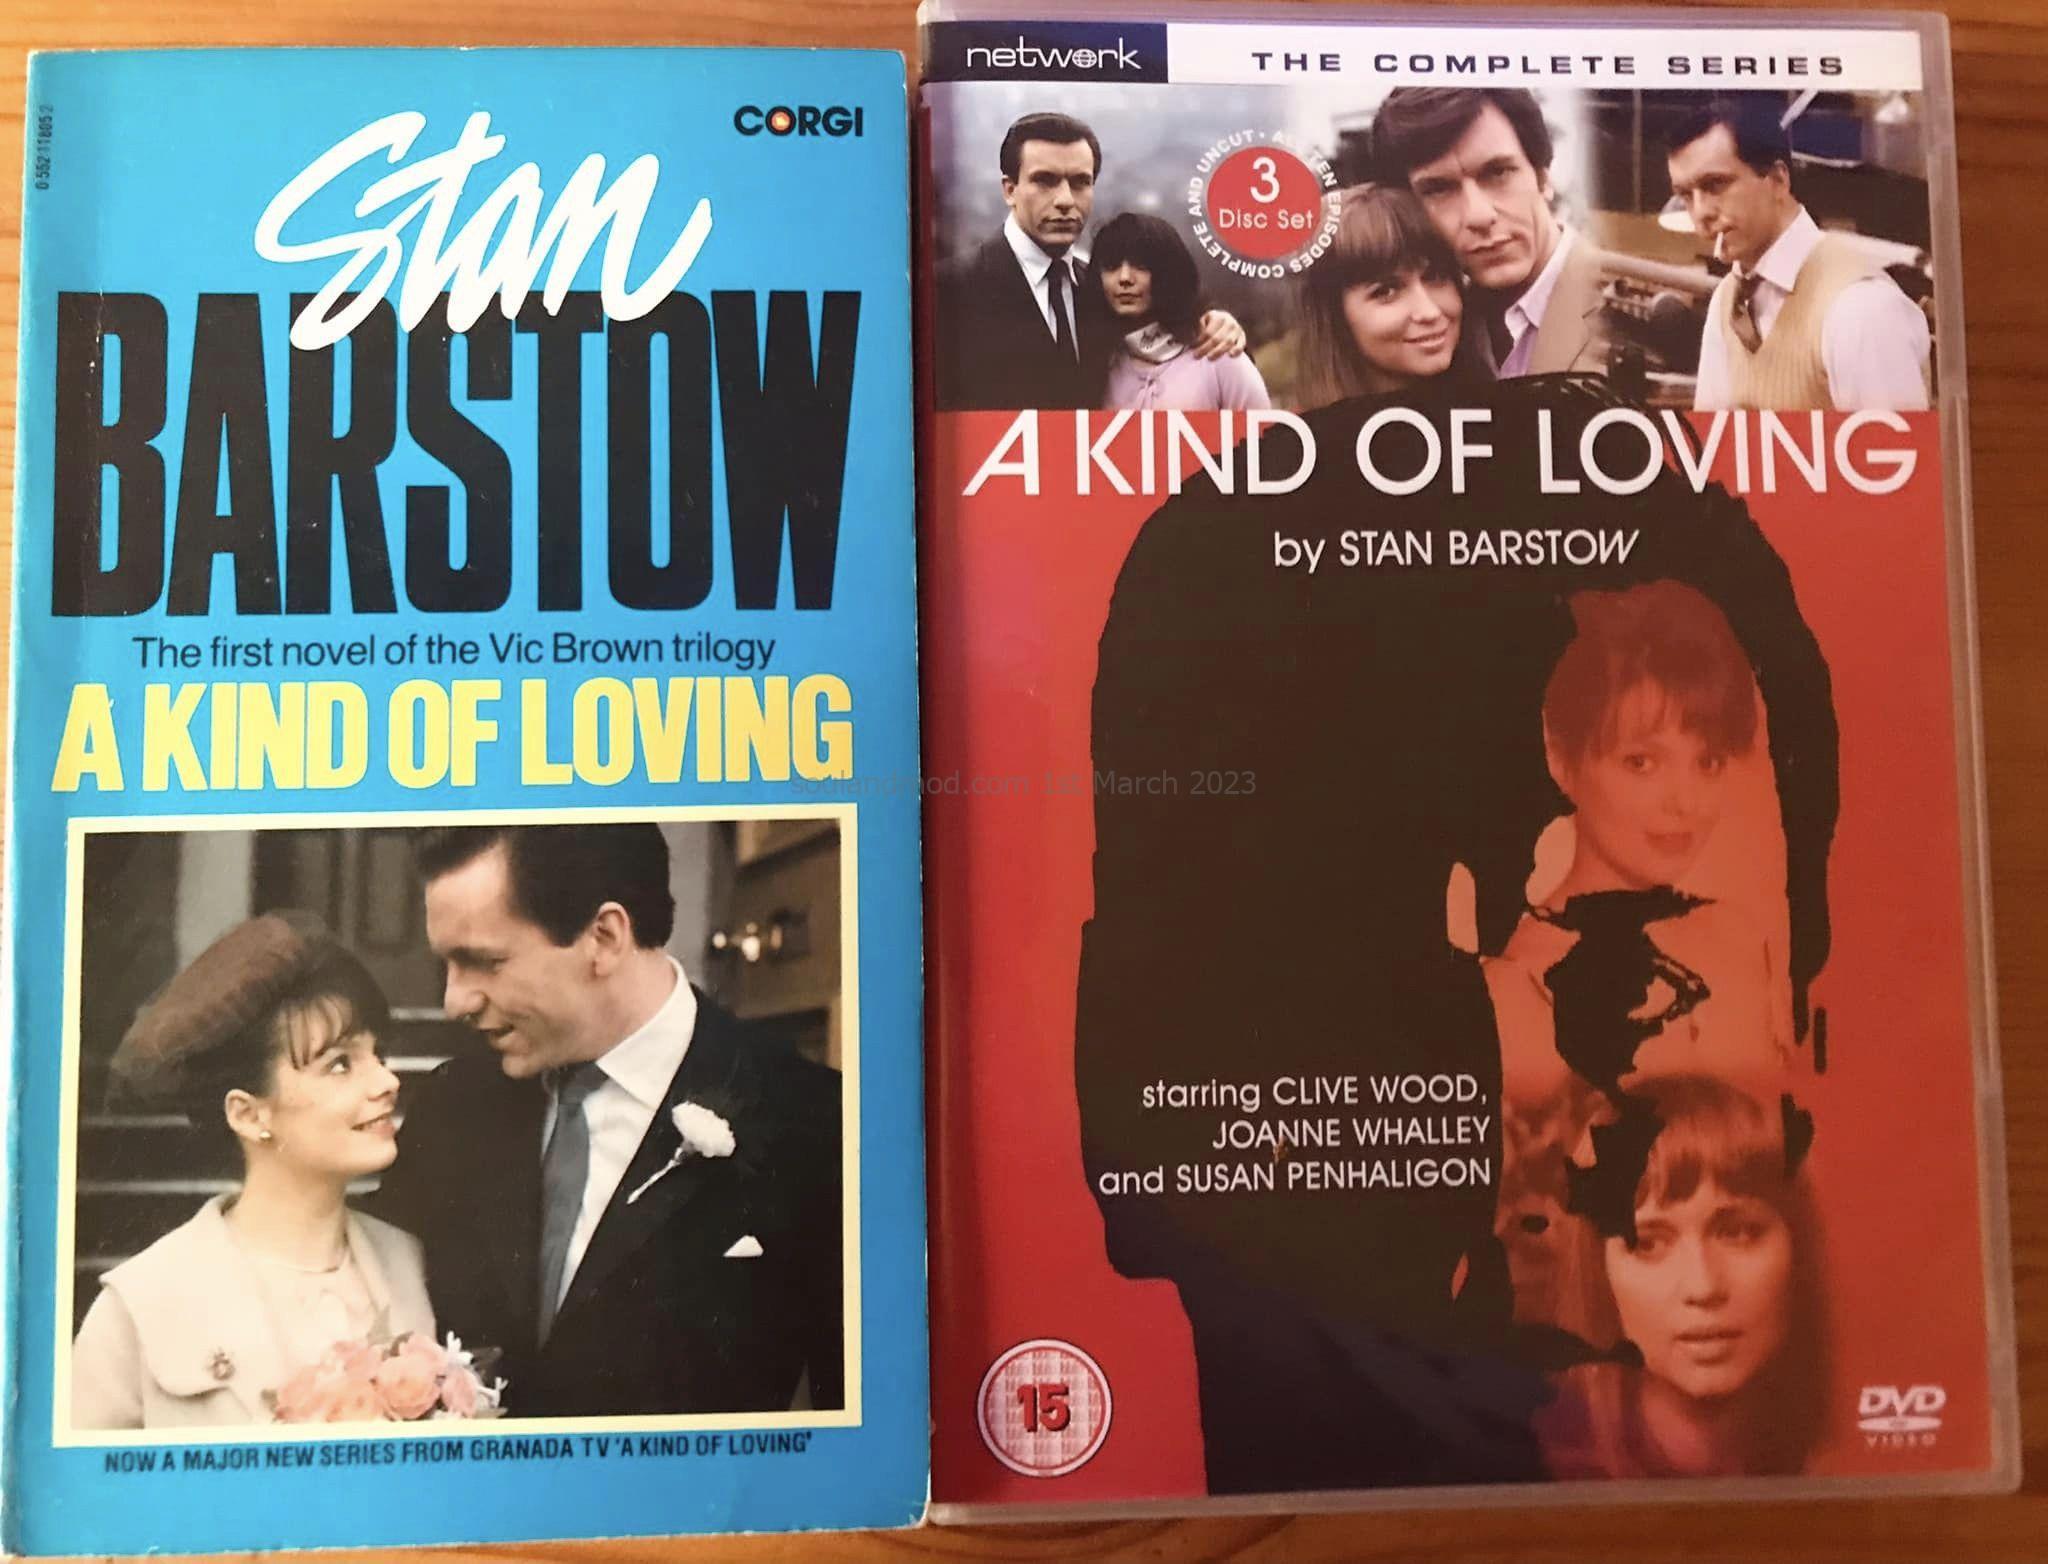 A Kind Of Loving by Stan Barstow